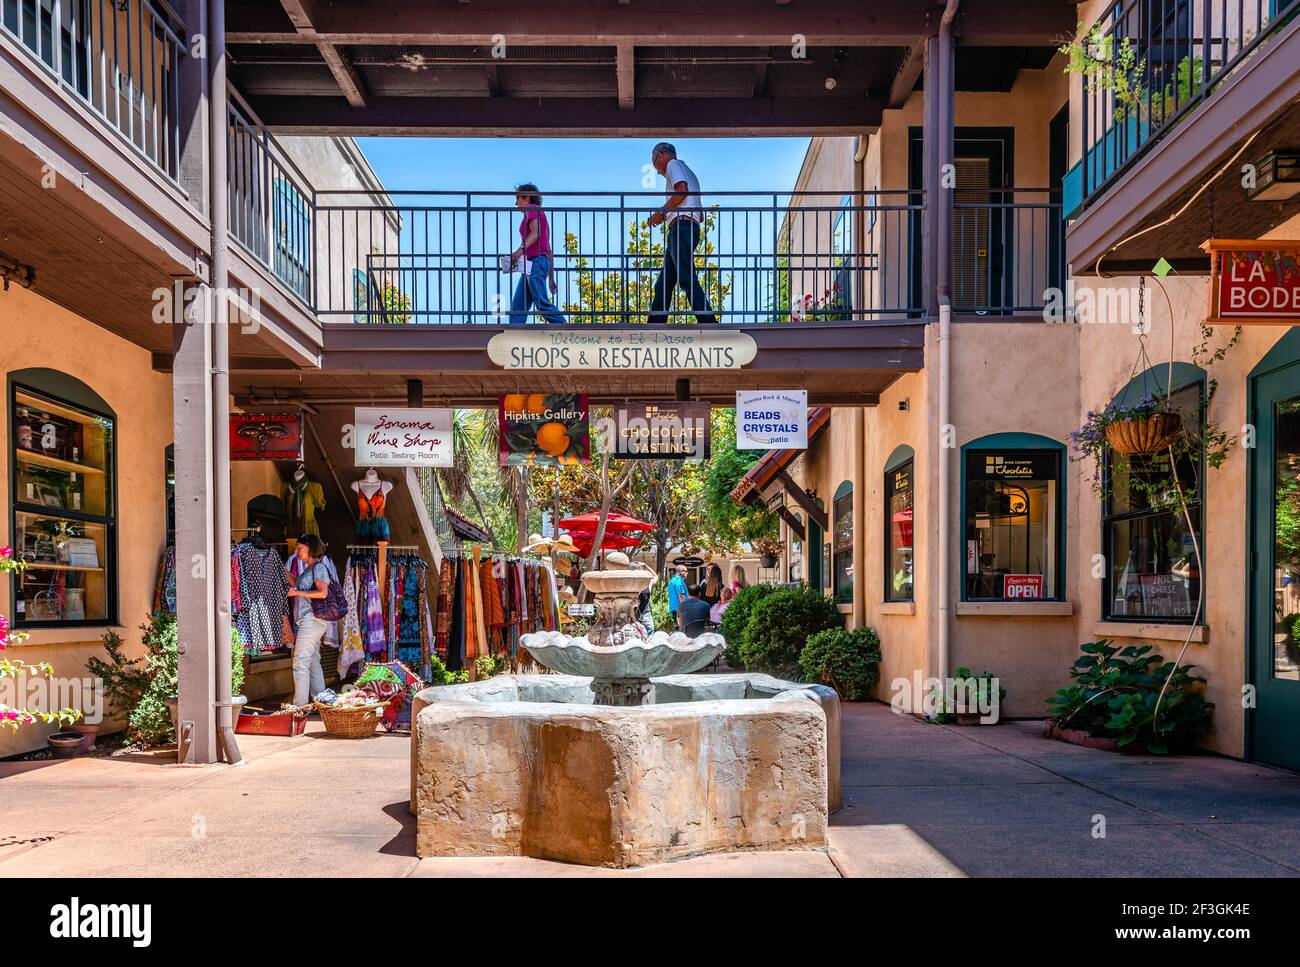 https://c8.alamy.com/comp/2F3GK4E/the-courtyard-of-el-paseo-de-sonoma-a-shopping-centre-on-first-street-napa-with-various-shops-located-off-the-historic-plaza-sonoma-ca-2F3GK4E.jpg